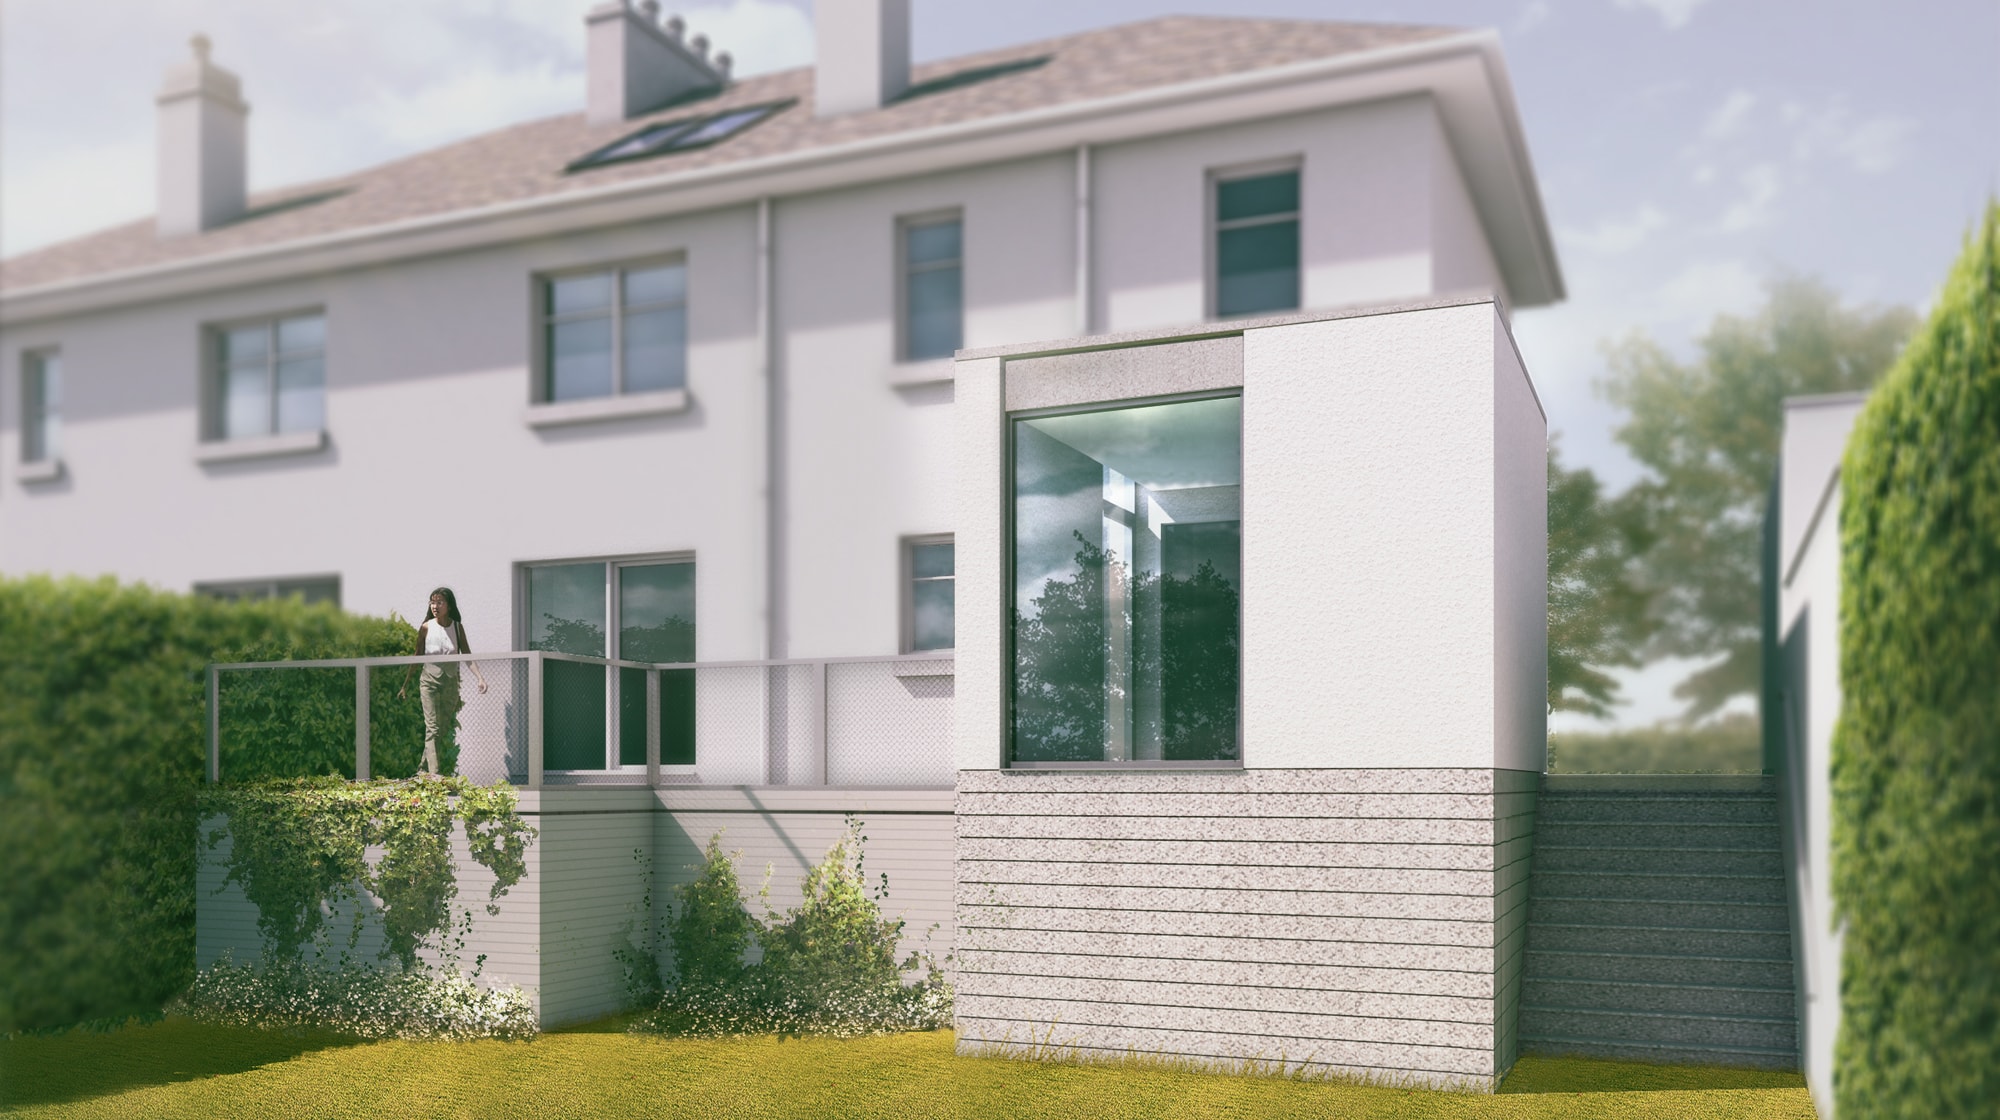 Planning Permission for cubic house extension, 